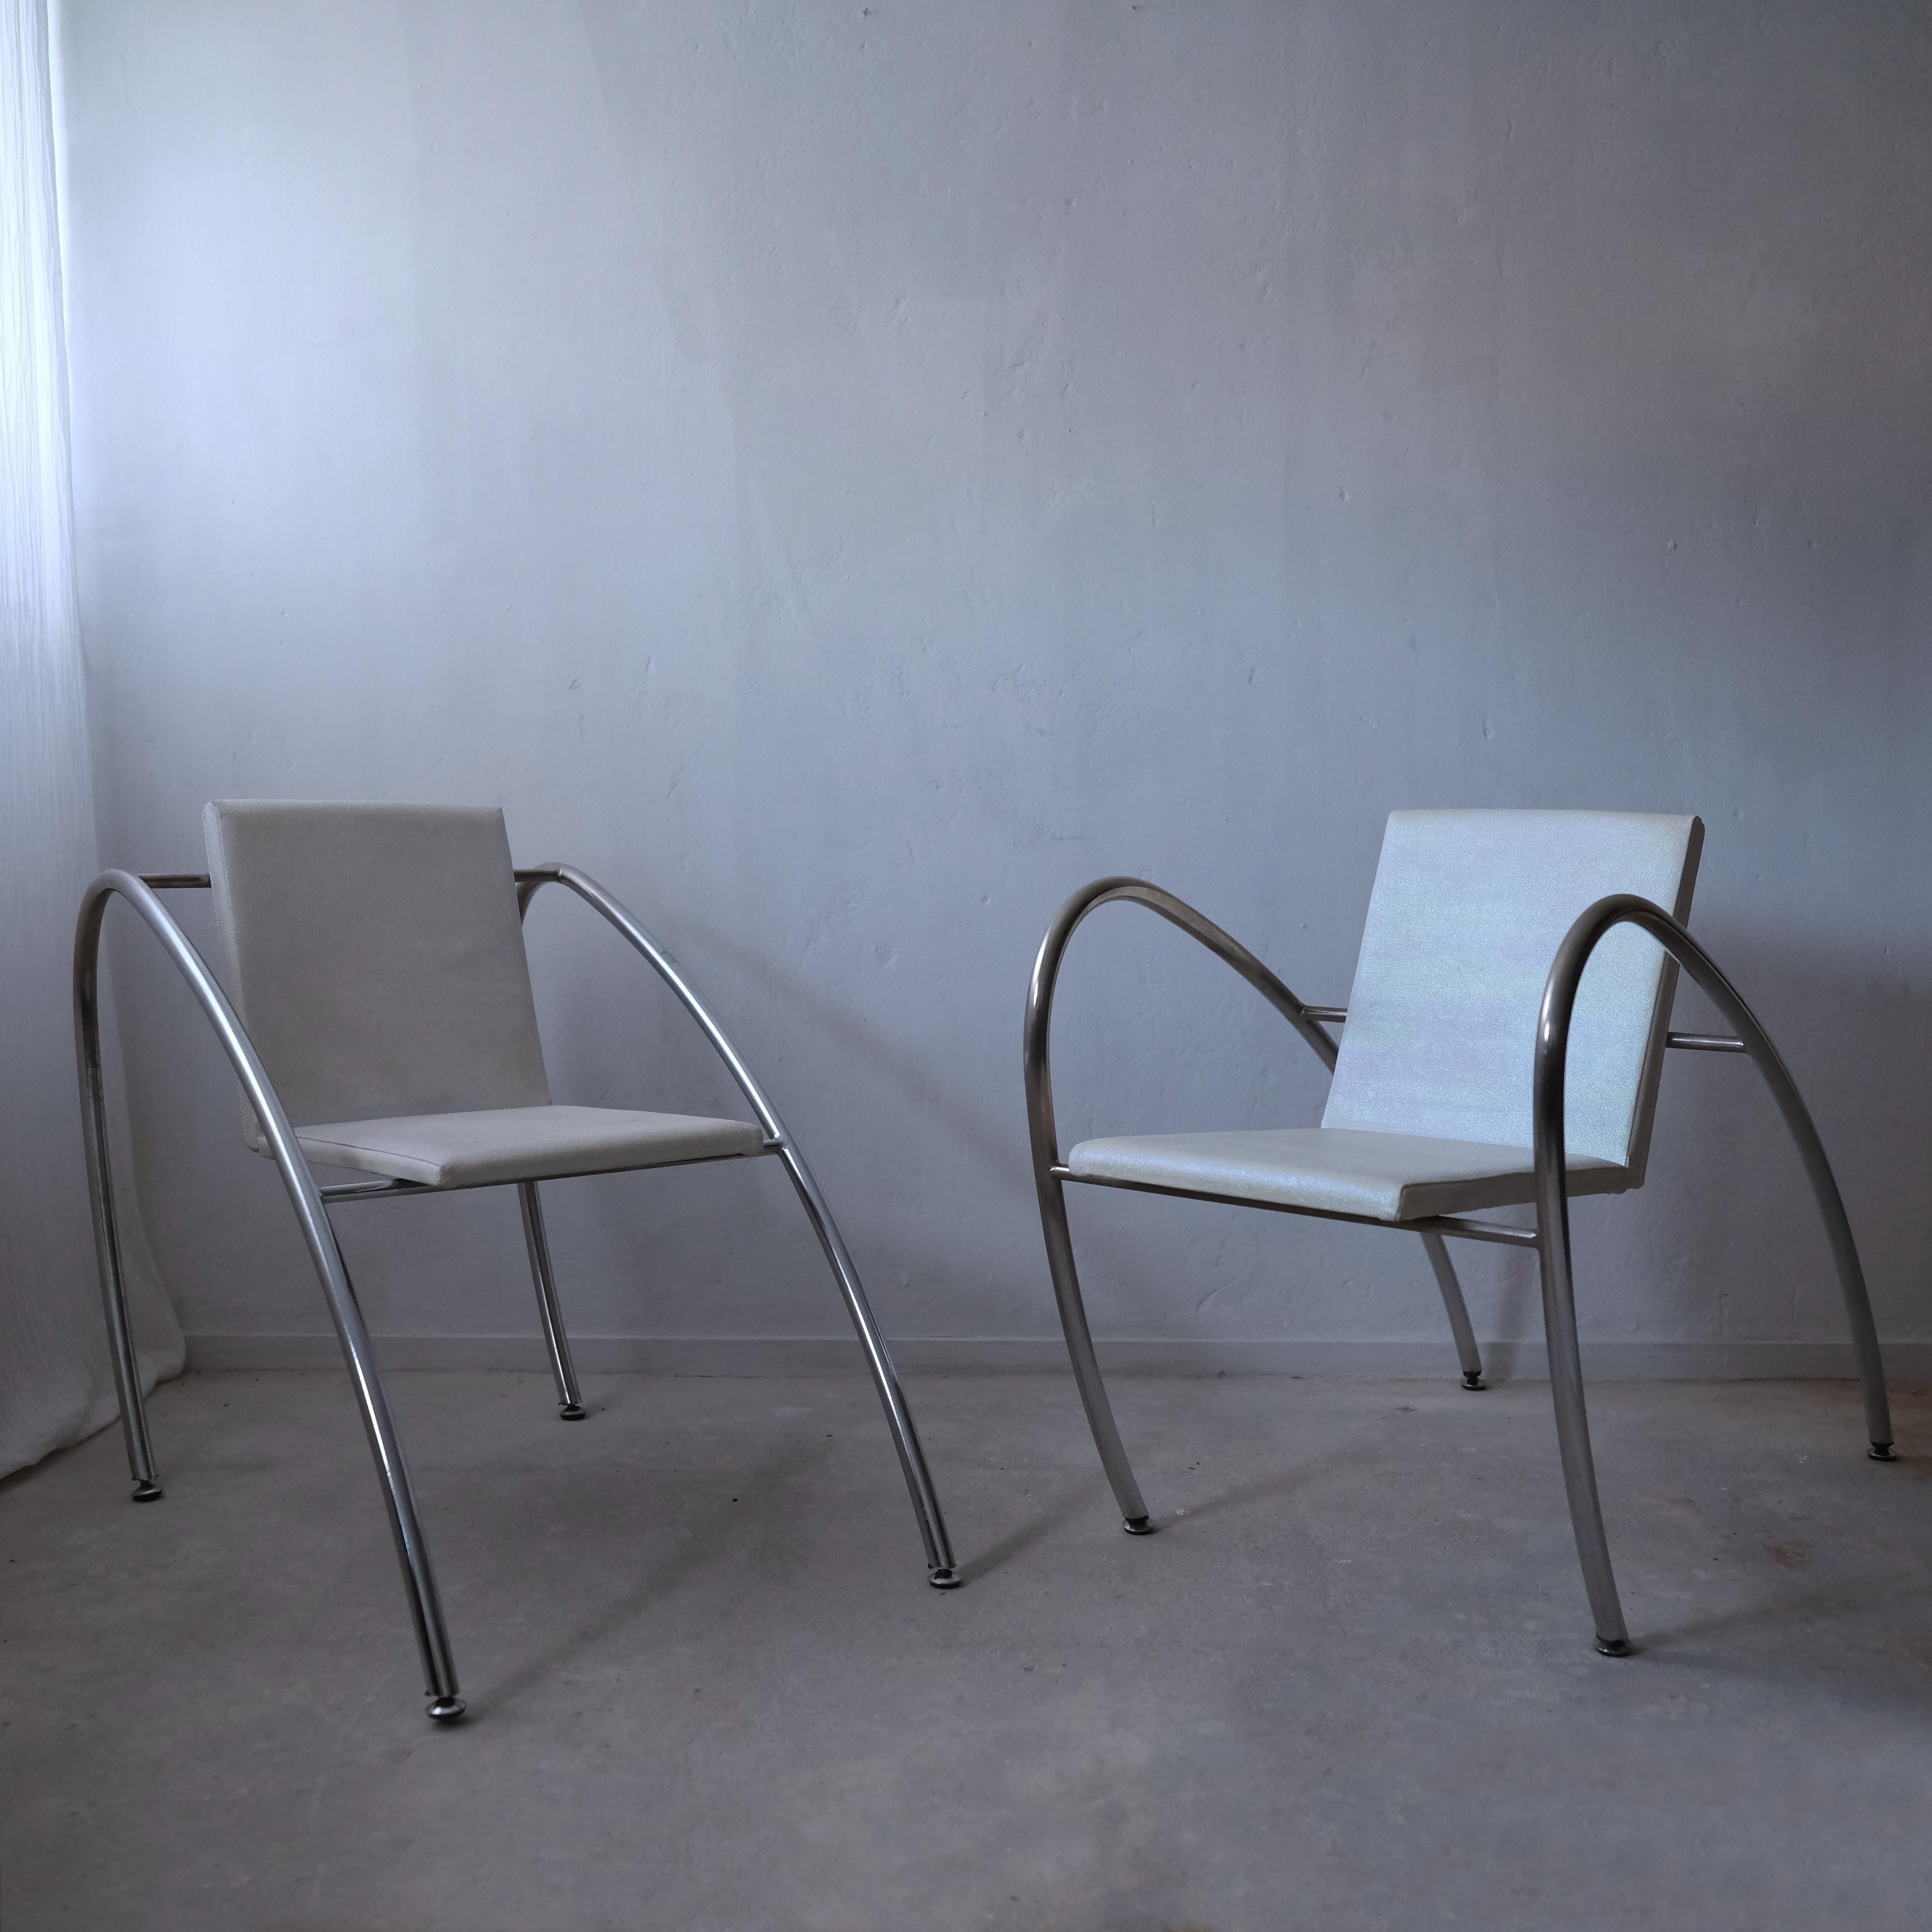 Late 20th Century Alain Domingo and François Scali  pair of Moreno - Marini Chairs For Sale